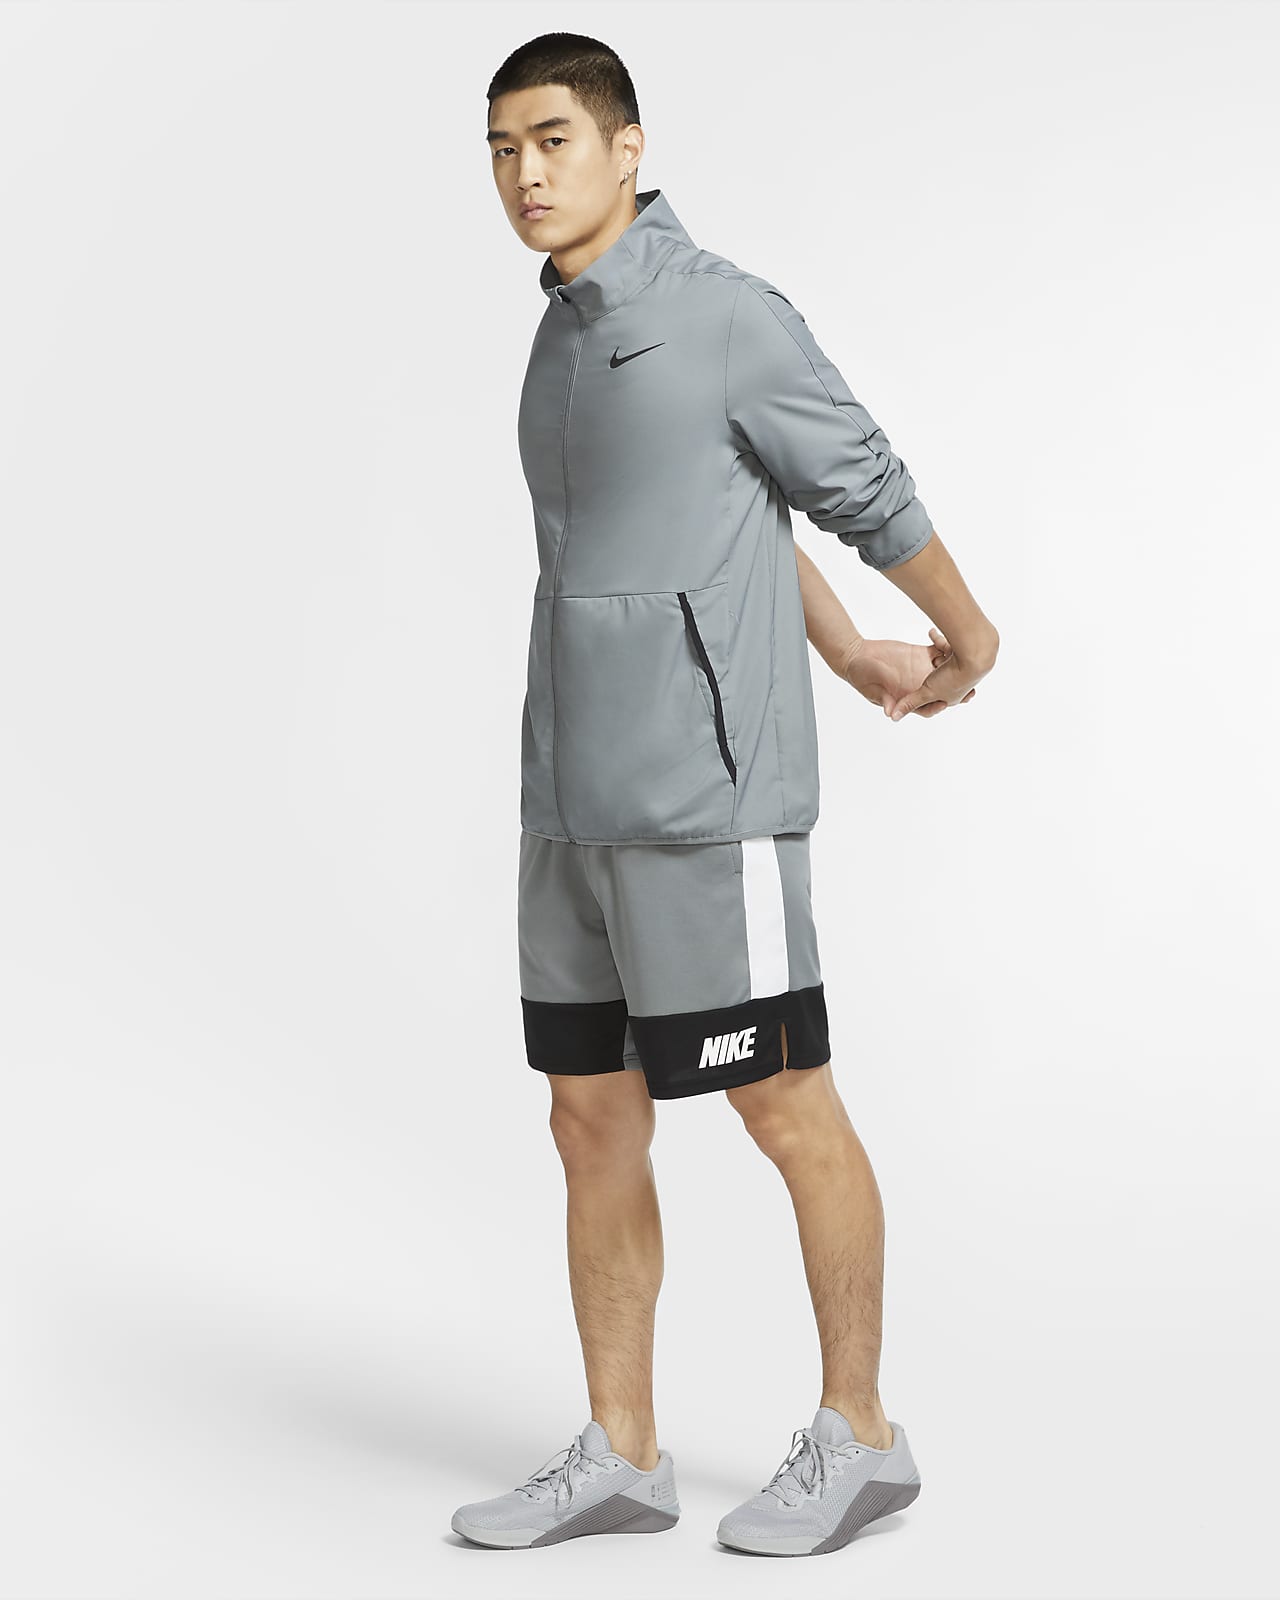 Top more than 227 nike dry training jacket latest